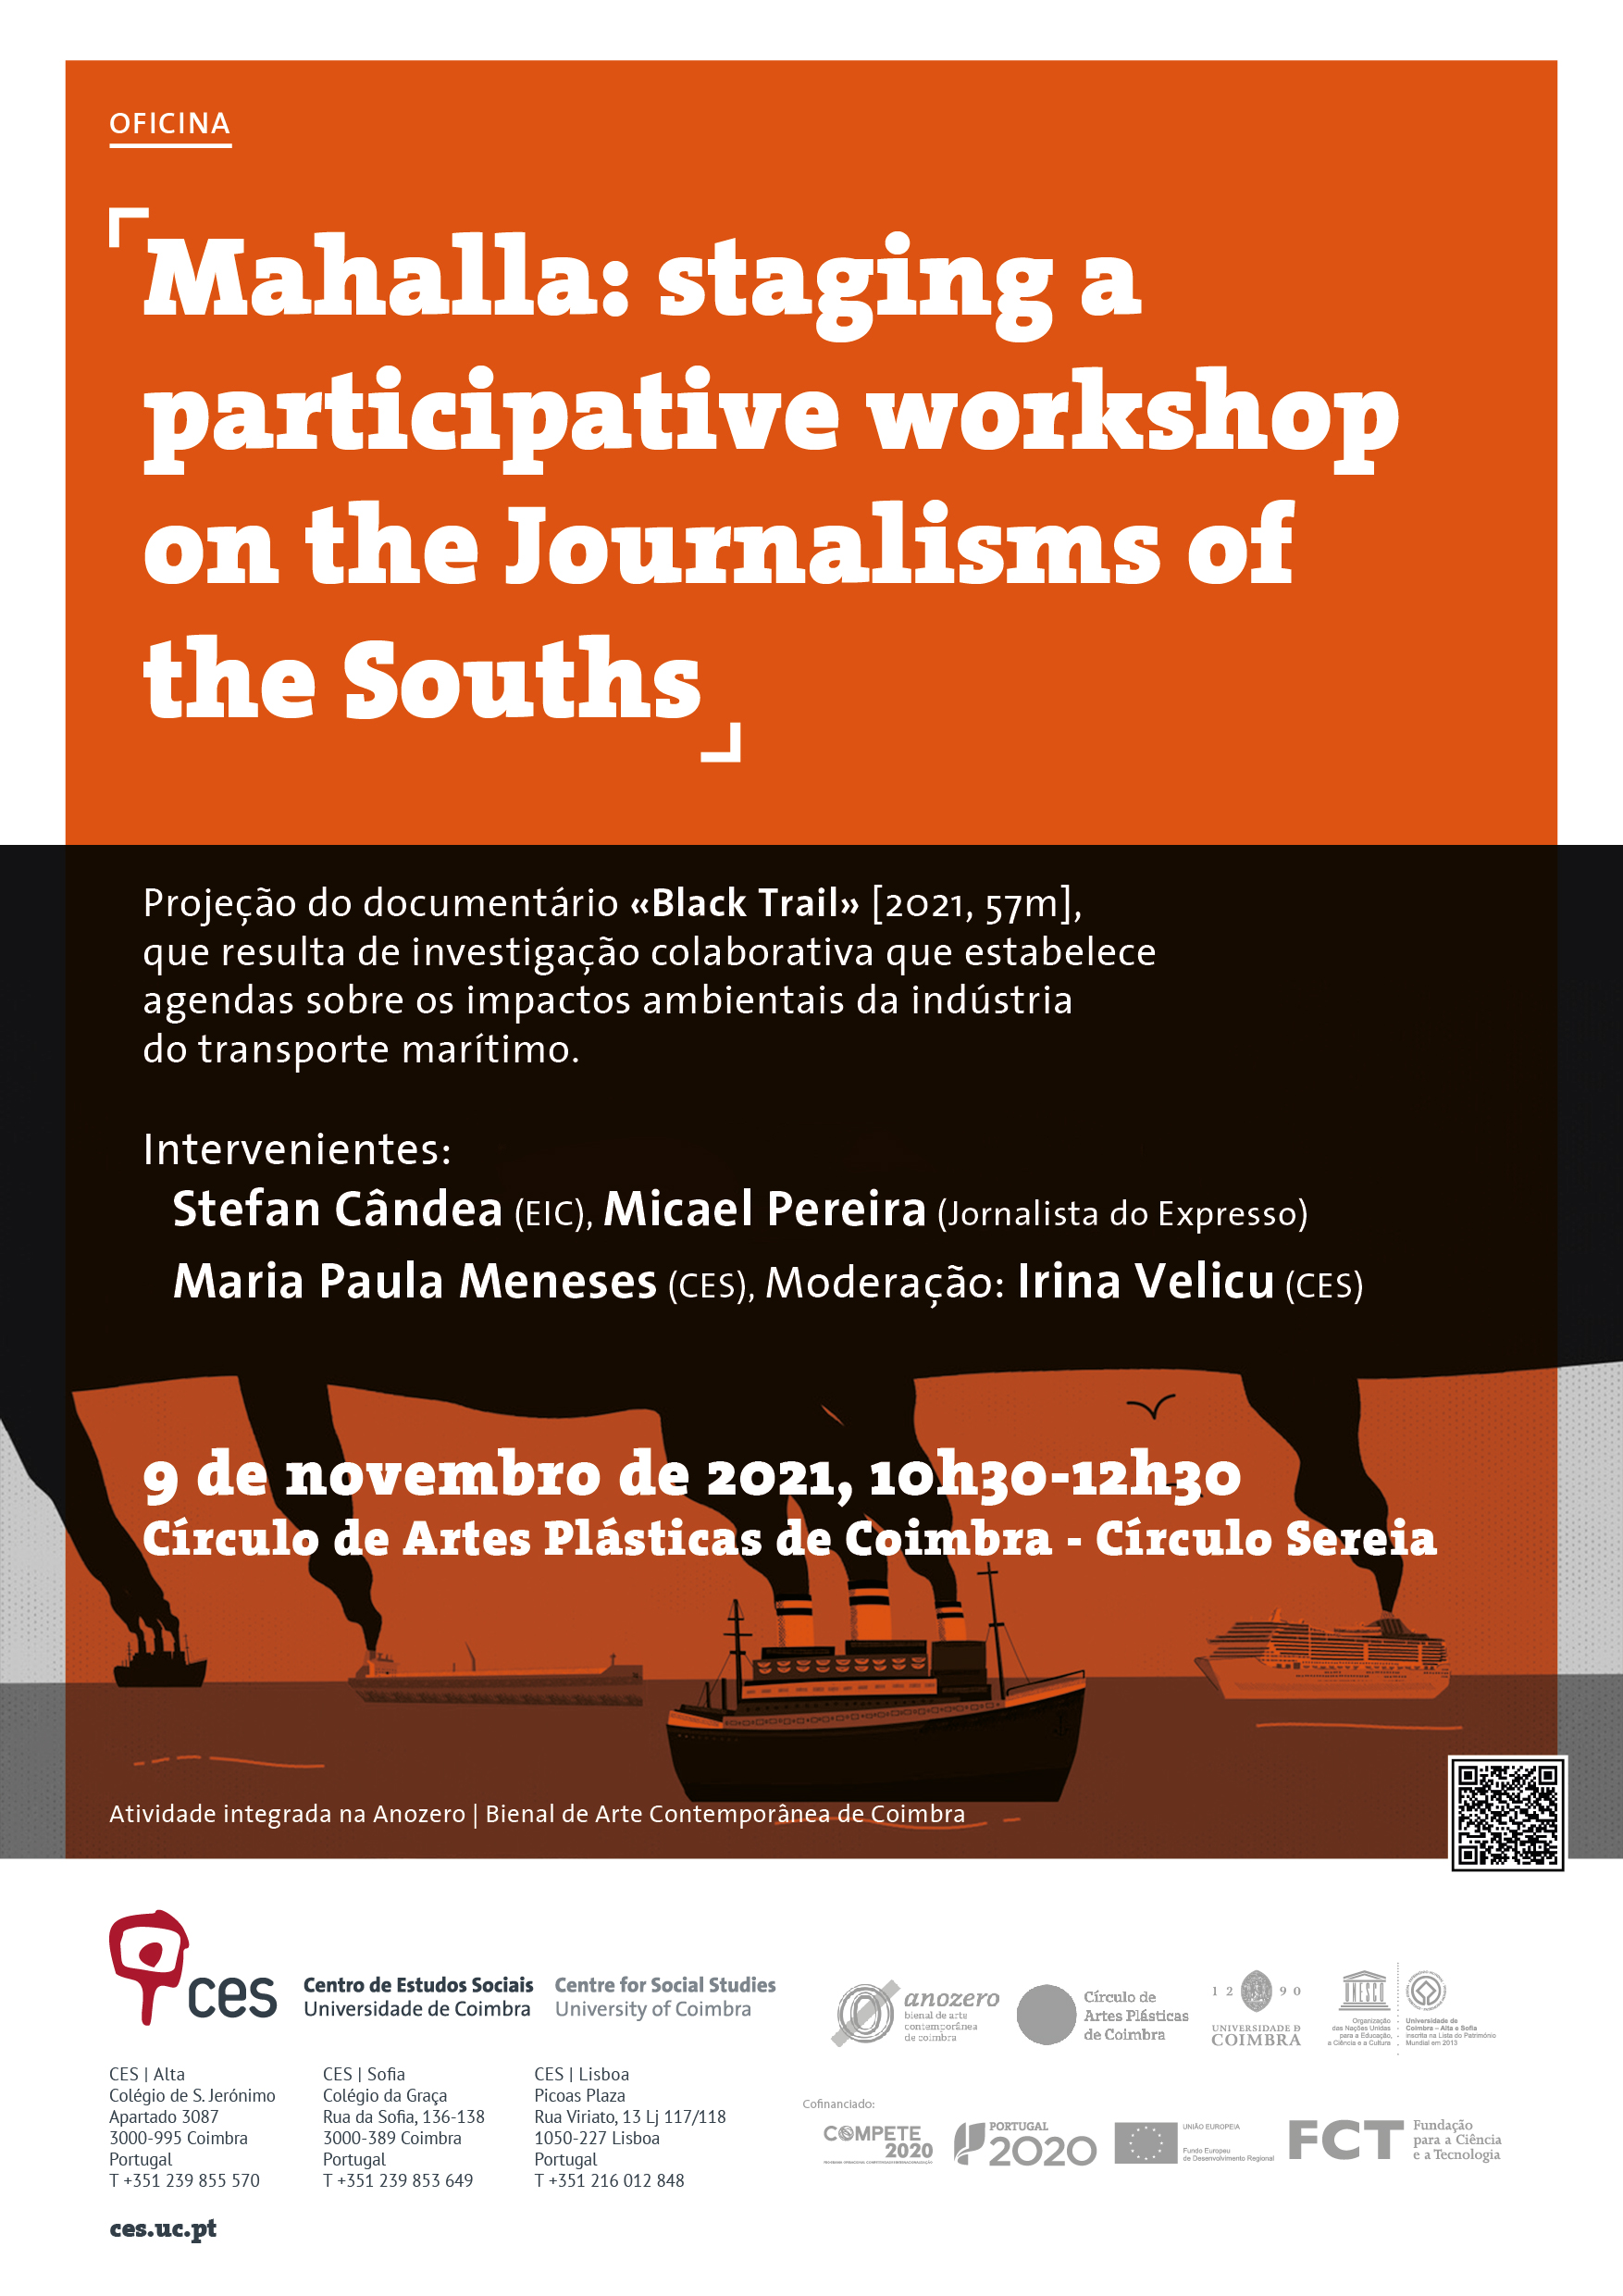 Mahalla: staging a participative workshop on the Journalisms of the Souths <span id="edit_35628"><script>$(function() { $('#edit_35628').load( "/myces/user/editobj.php?tipo=evento&id=35628" ); });</script></span>